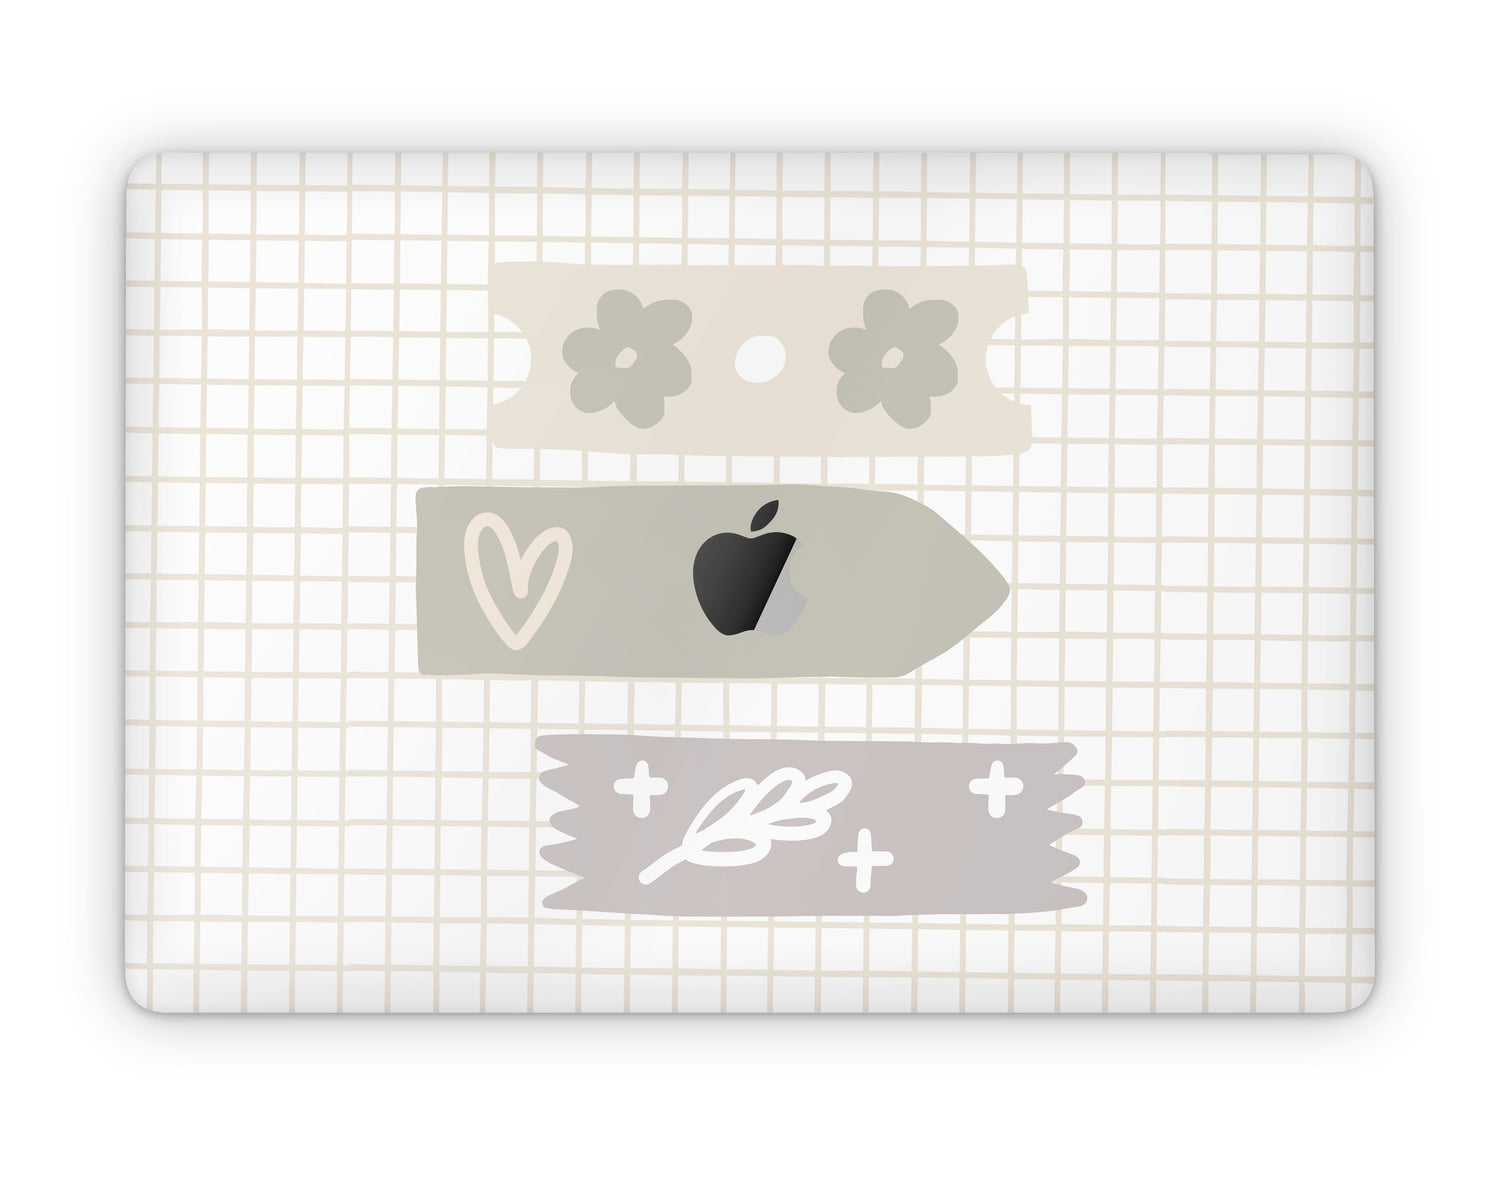 Cute Washi Tape Aesthetic MacBook Skin – Lux Skins Official